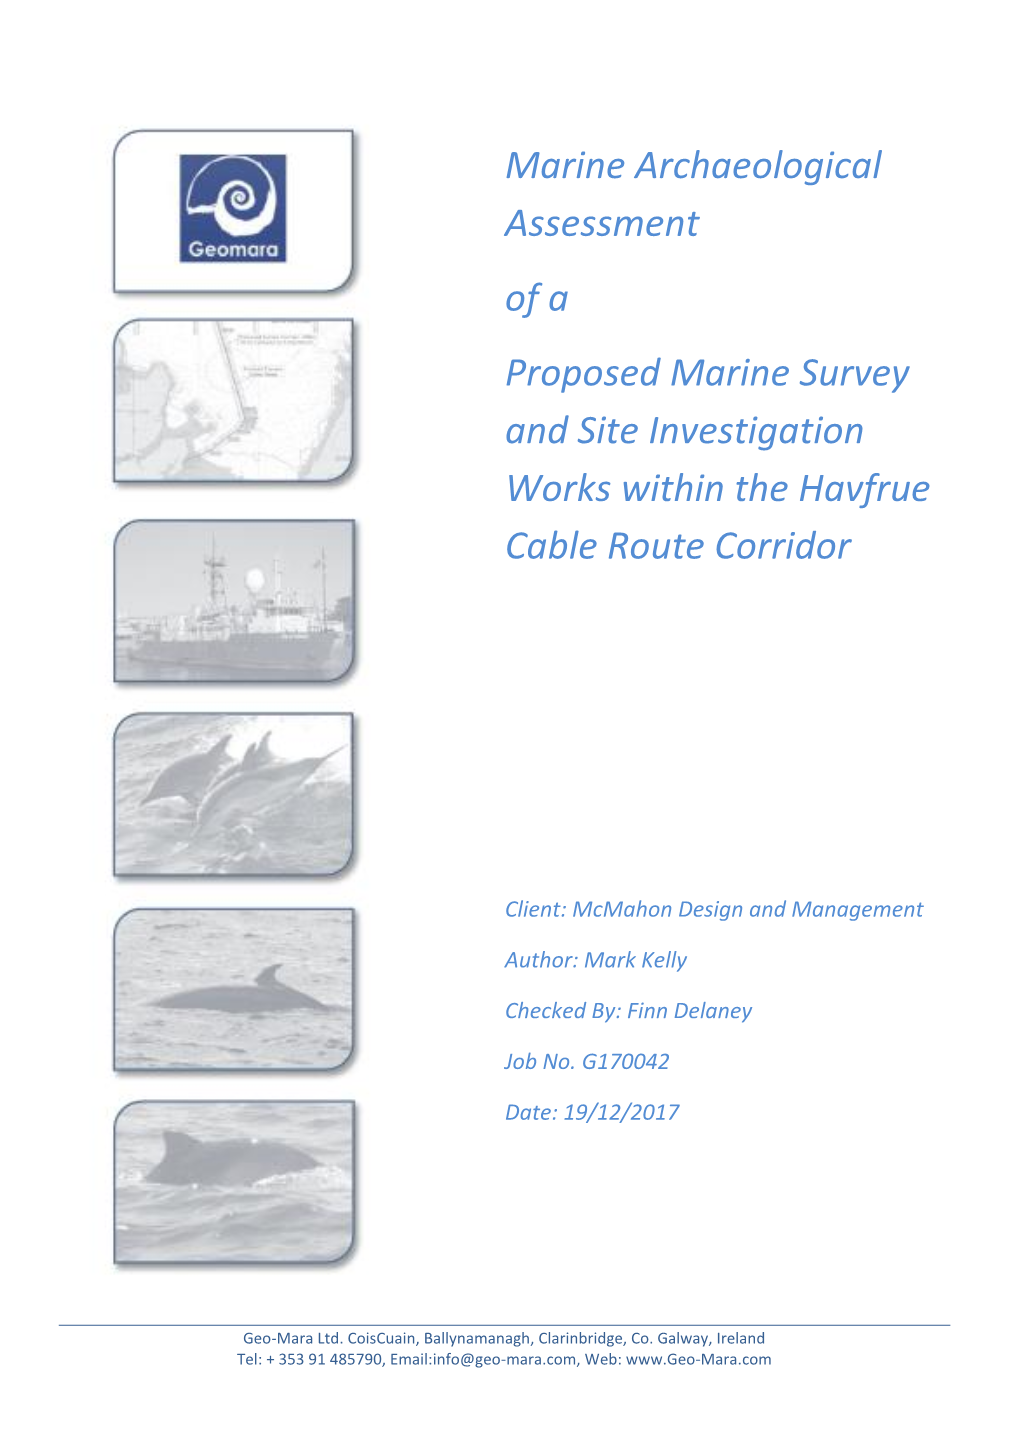 Marine Archaeological Assessment of a Proposed Marine Survey and Site Investigation Works Within the Havfrue Cable Route Corridor